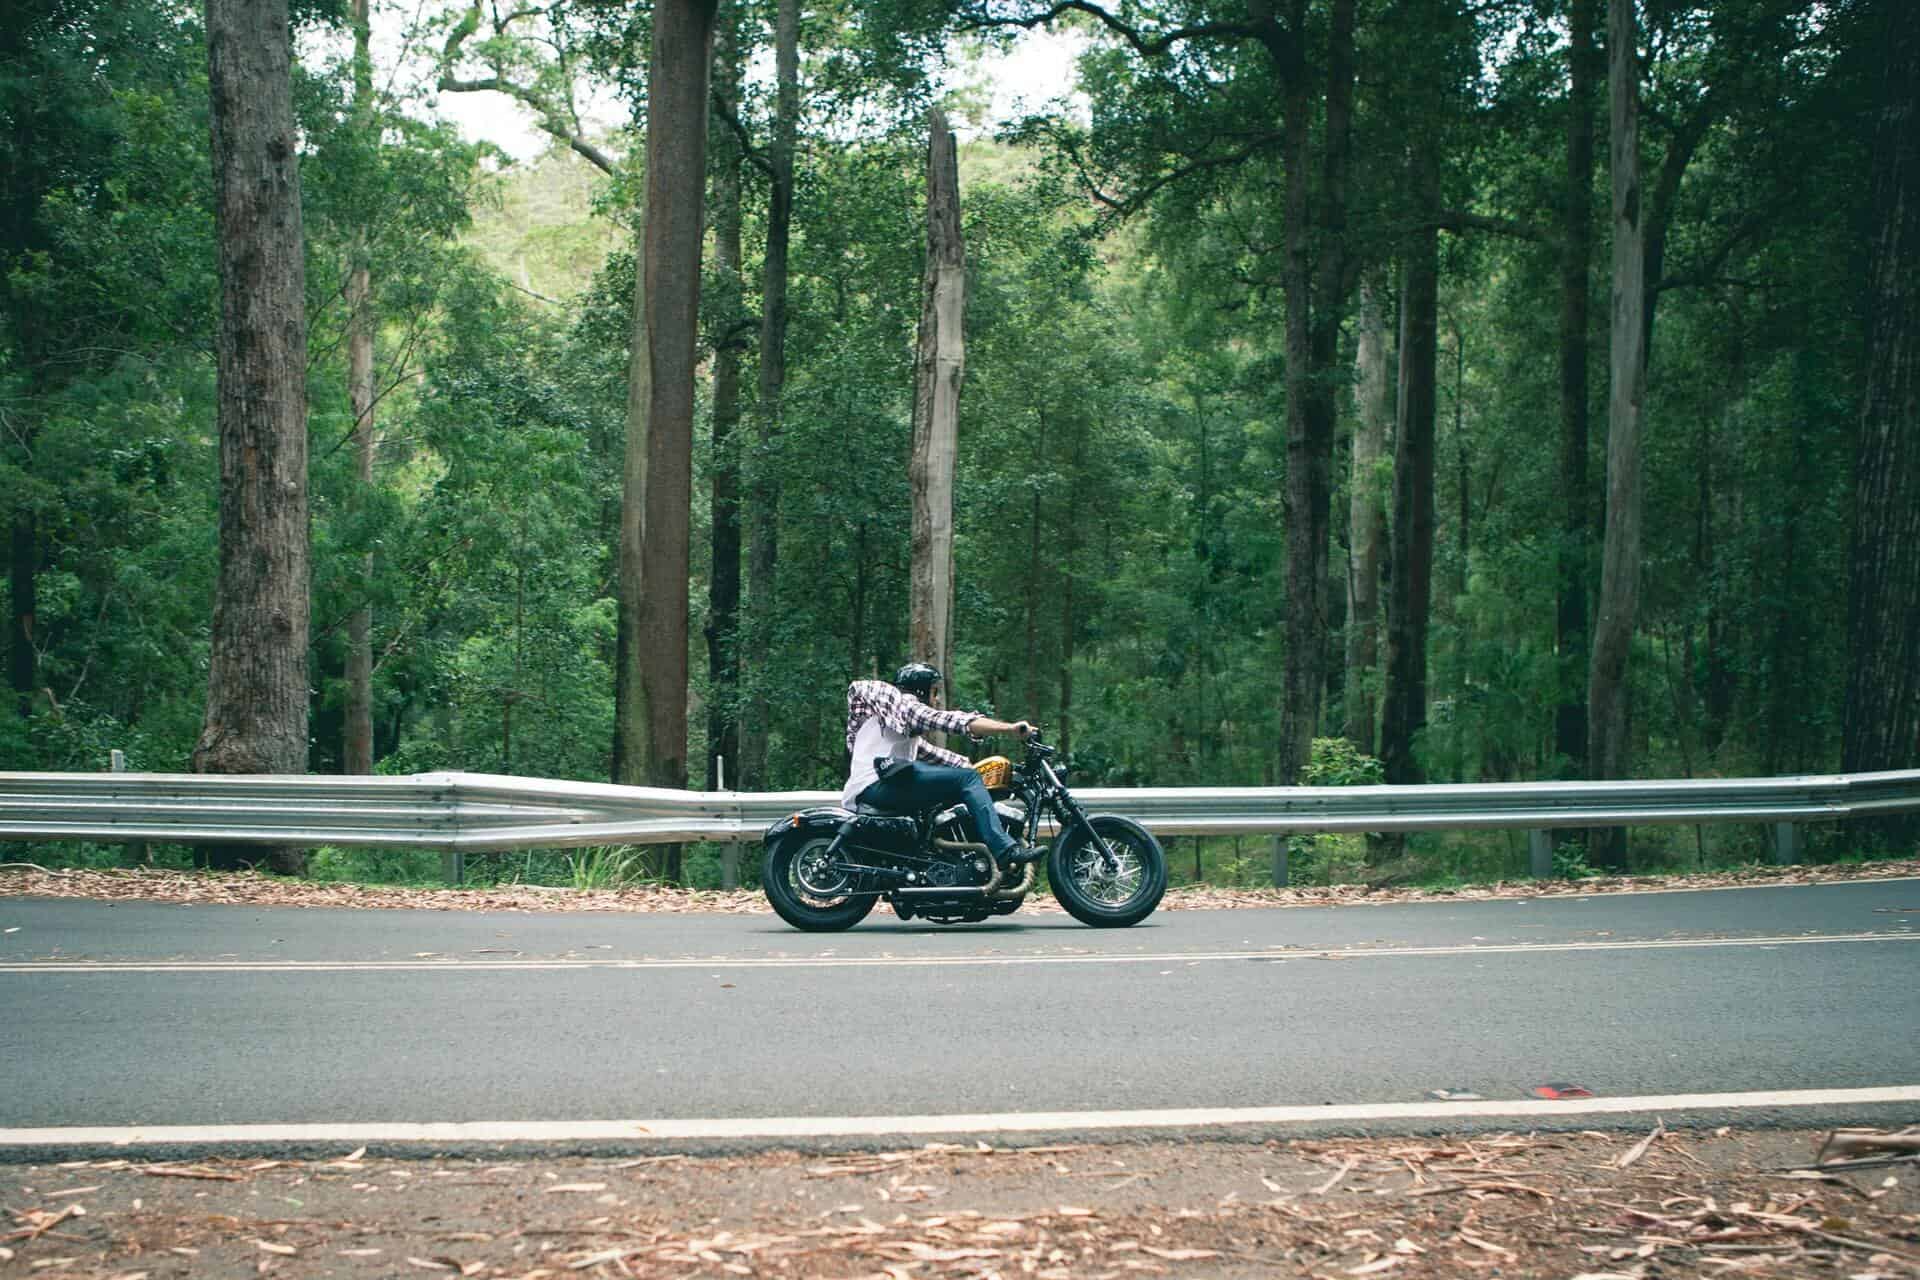 A man drives a motorcycle down a road past trees in a wooded area.